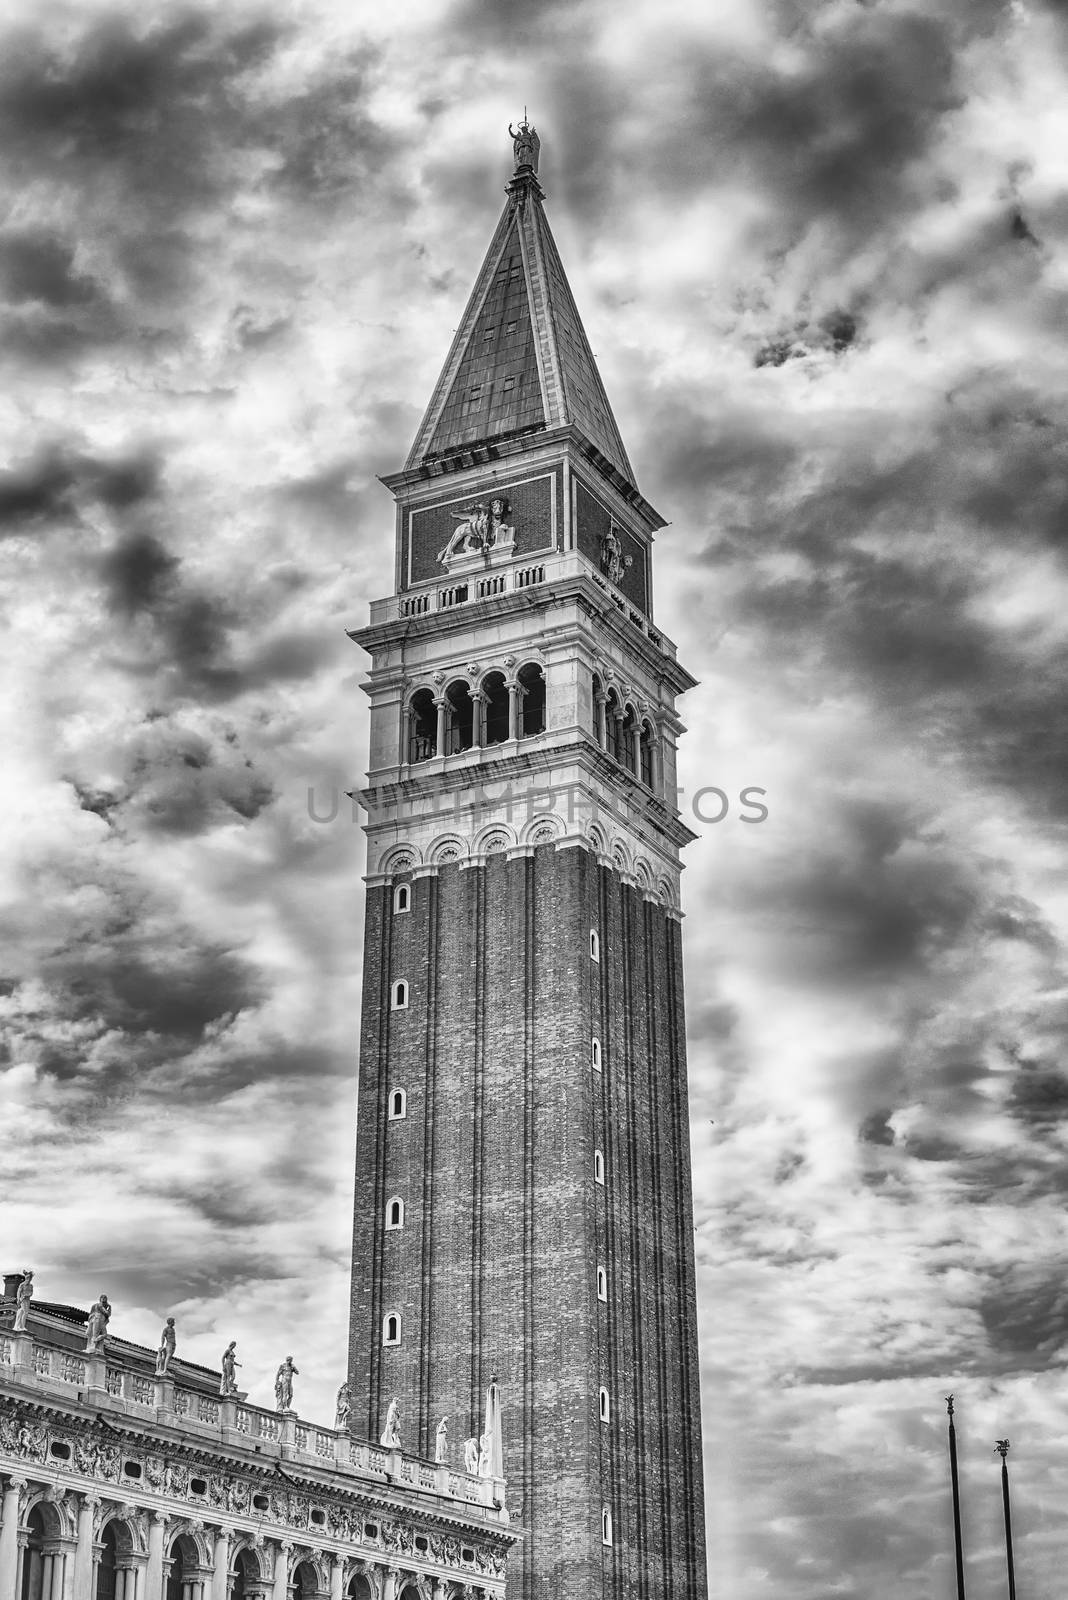 St Mark's Campanile, bell tower of St Mark's Basilica in Venice, Italy. Located in the Piazza San Marco, it is one of the most recognizable symbols of the city